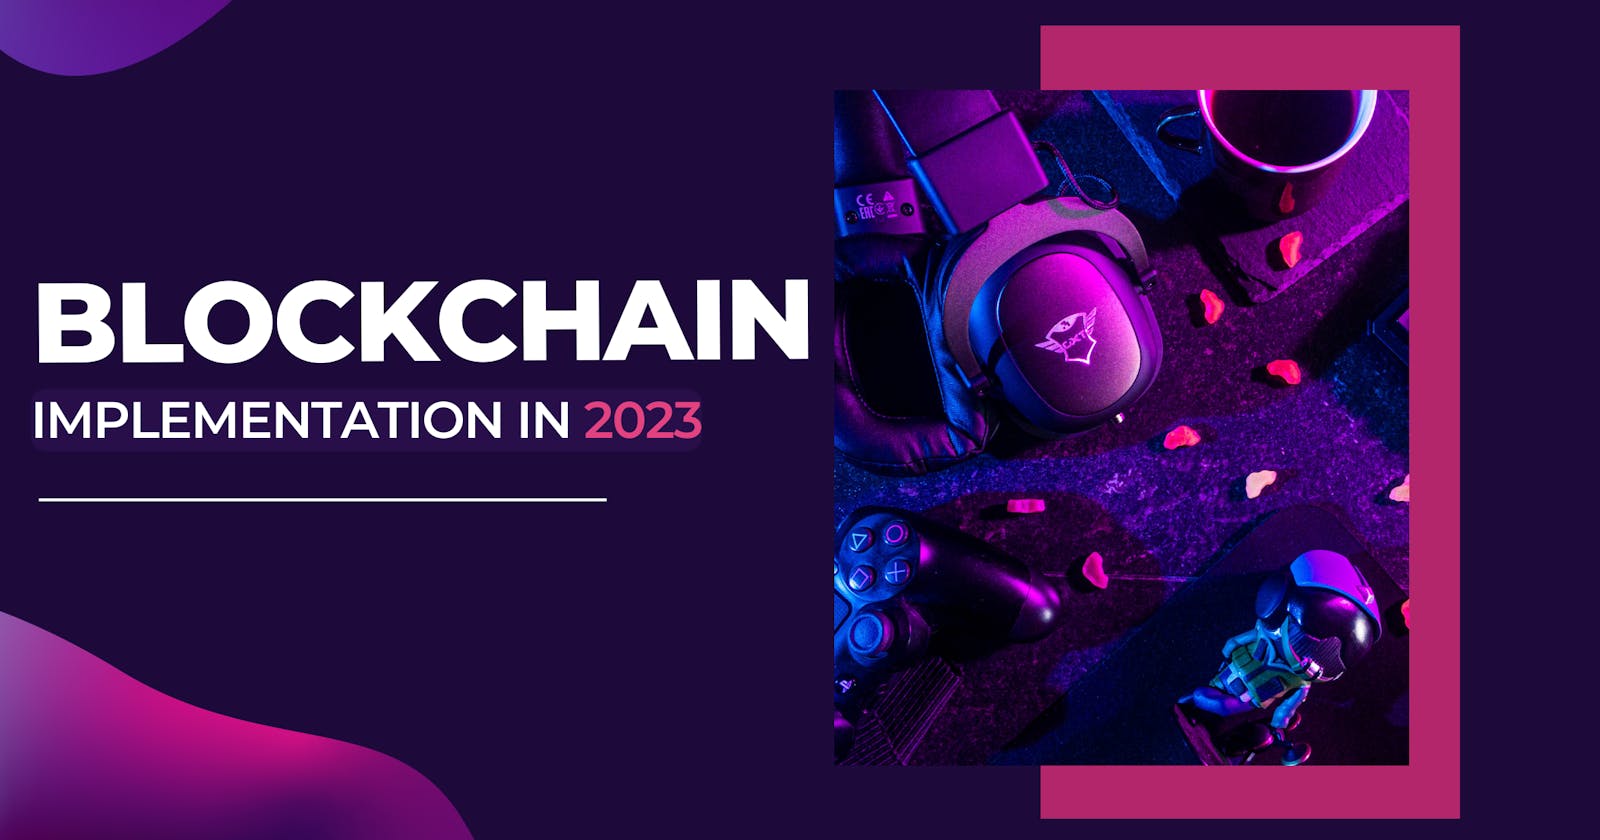 All you need to know about Blockchain implementation in 2023